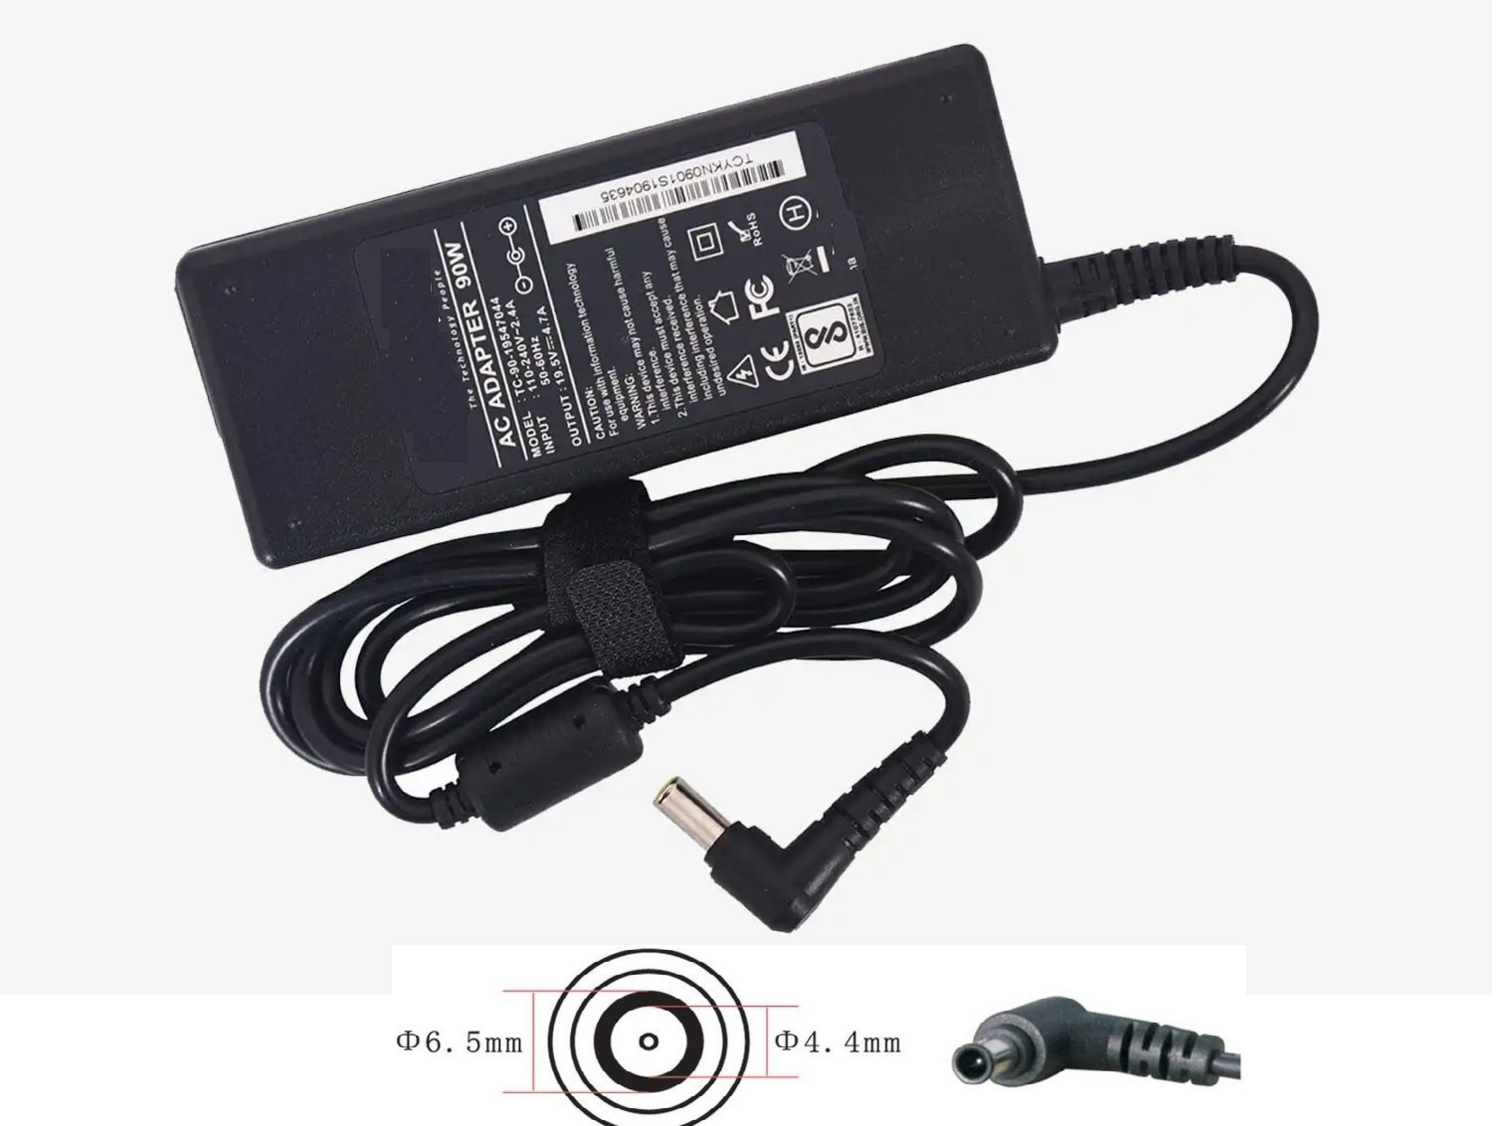 Sony vaio FW series NS series NW series Compatible Laptop charger / AC power Adaptor